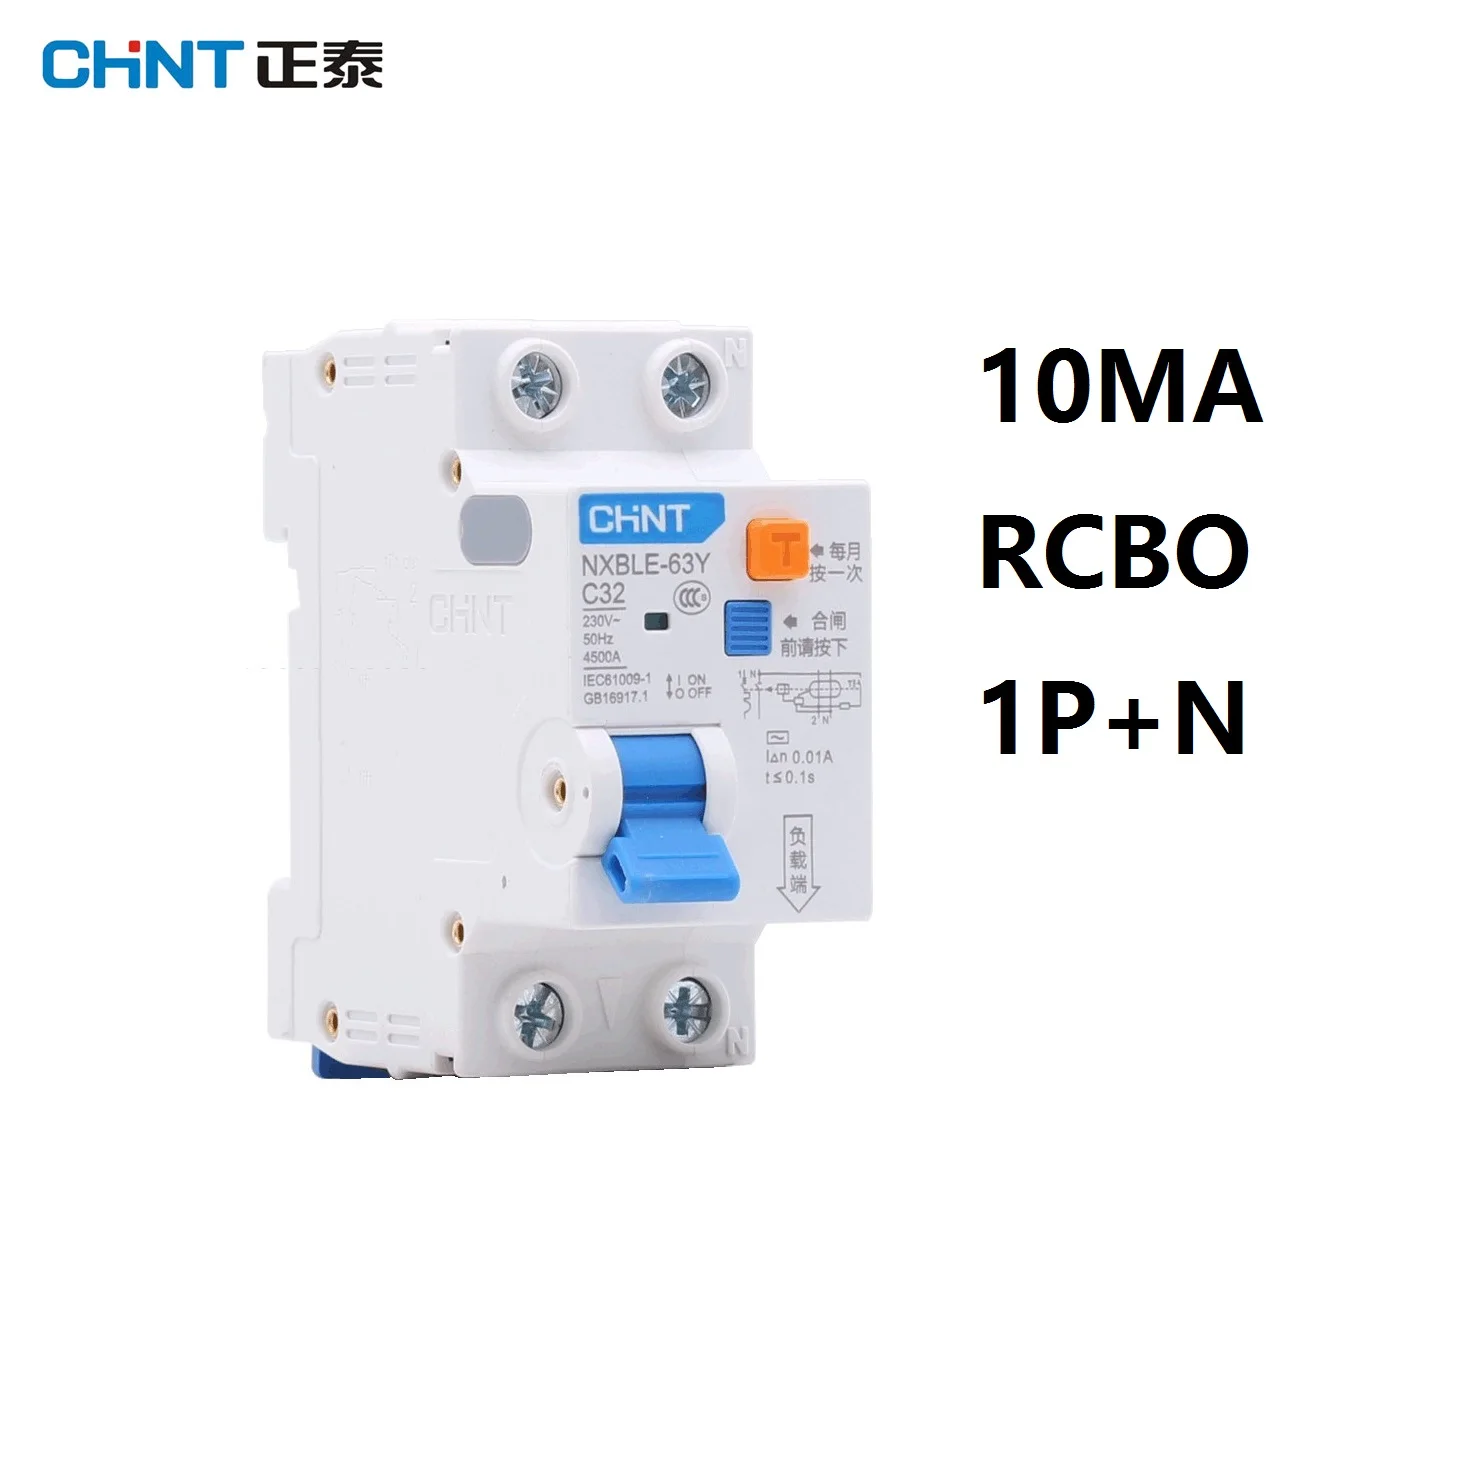 

CHINT NXBLE-63Y 6A 10A 16A 32A 63A 10MA 0.01A RCBO 1P+N 230V Residual current Circuit breaker over current Leakage protection